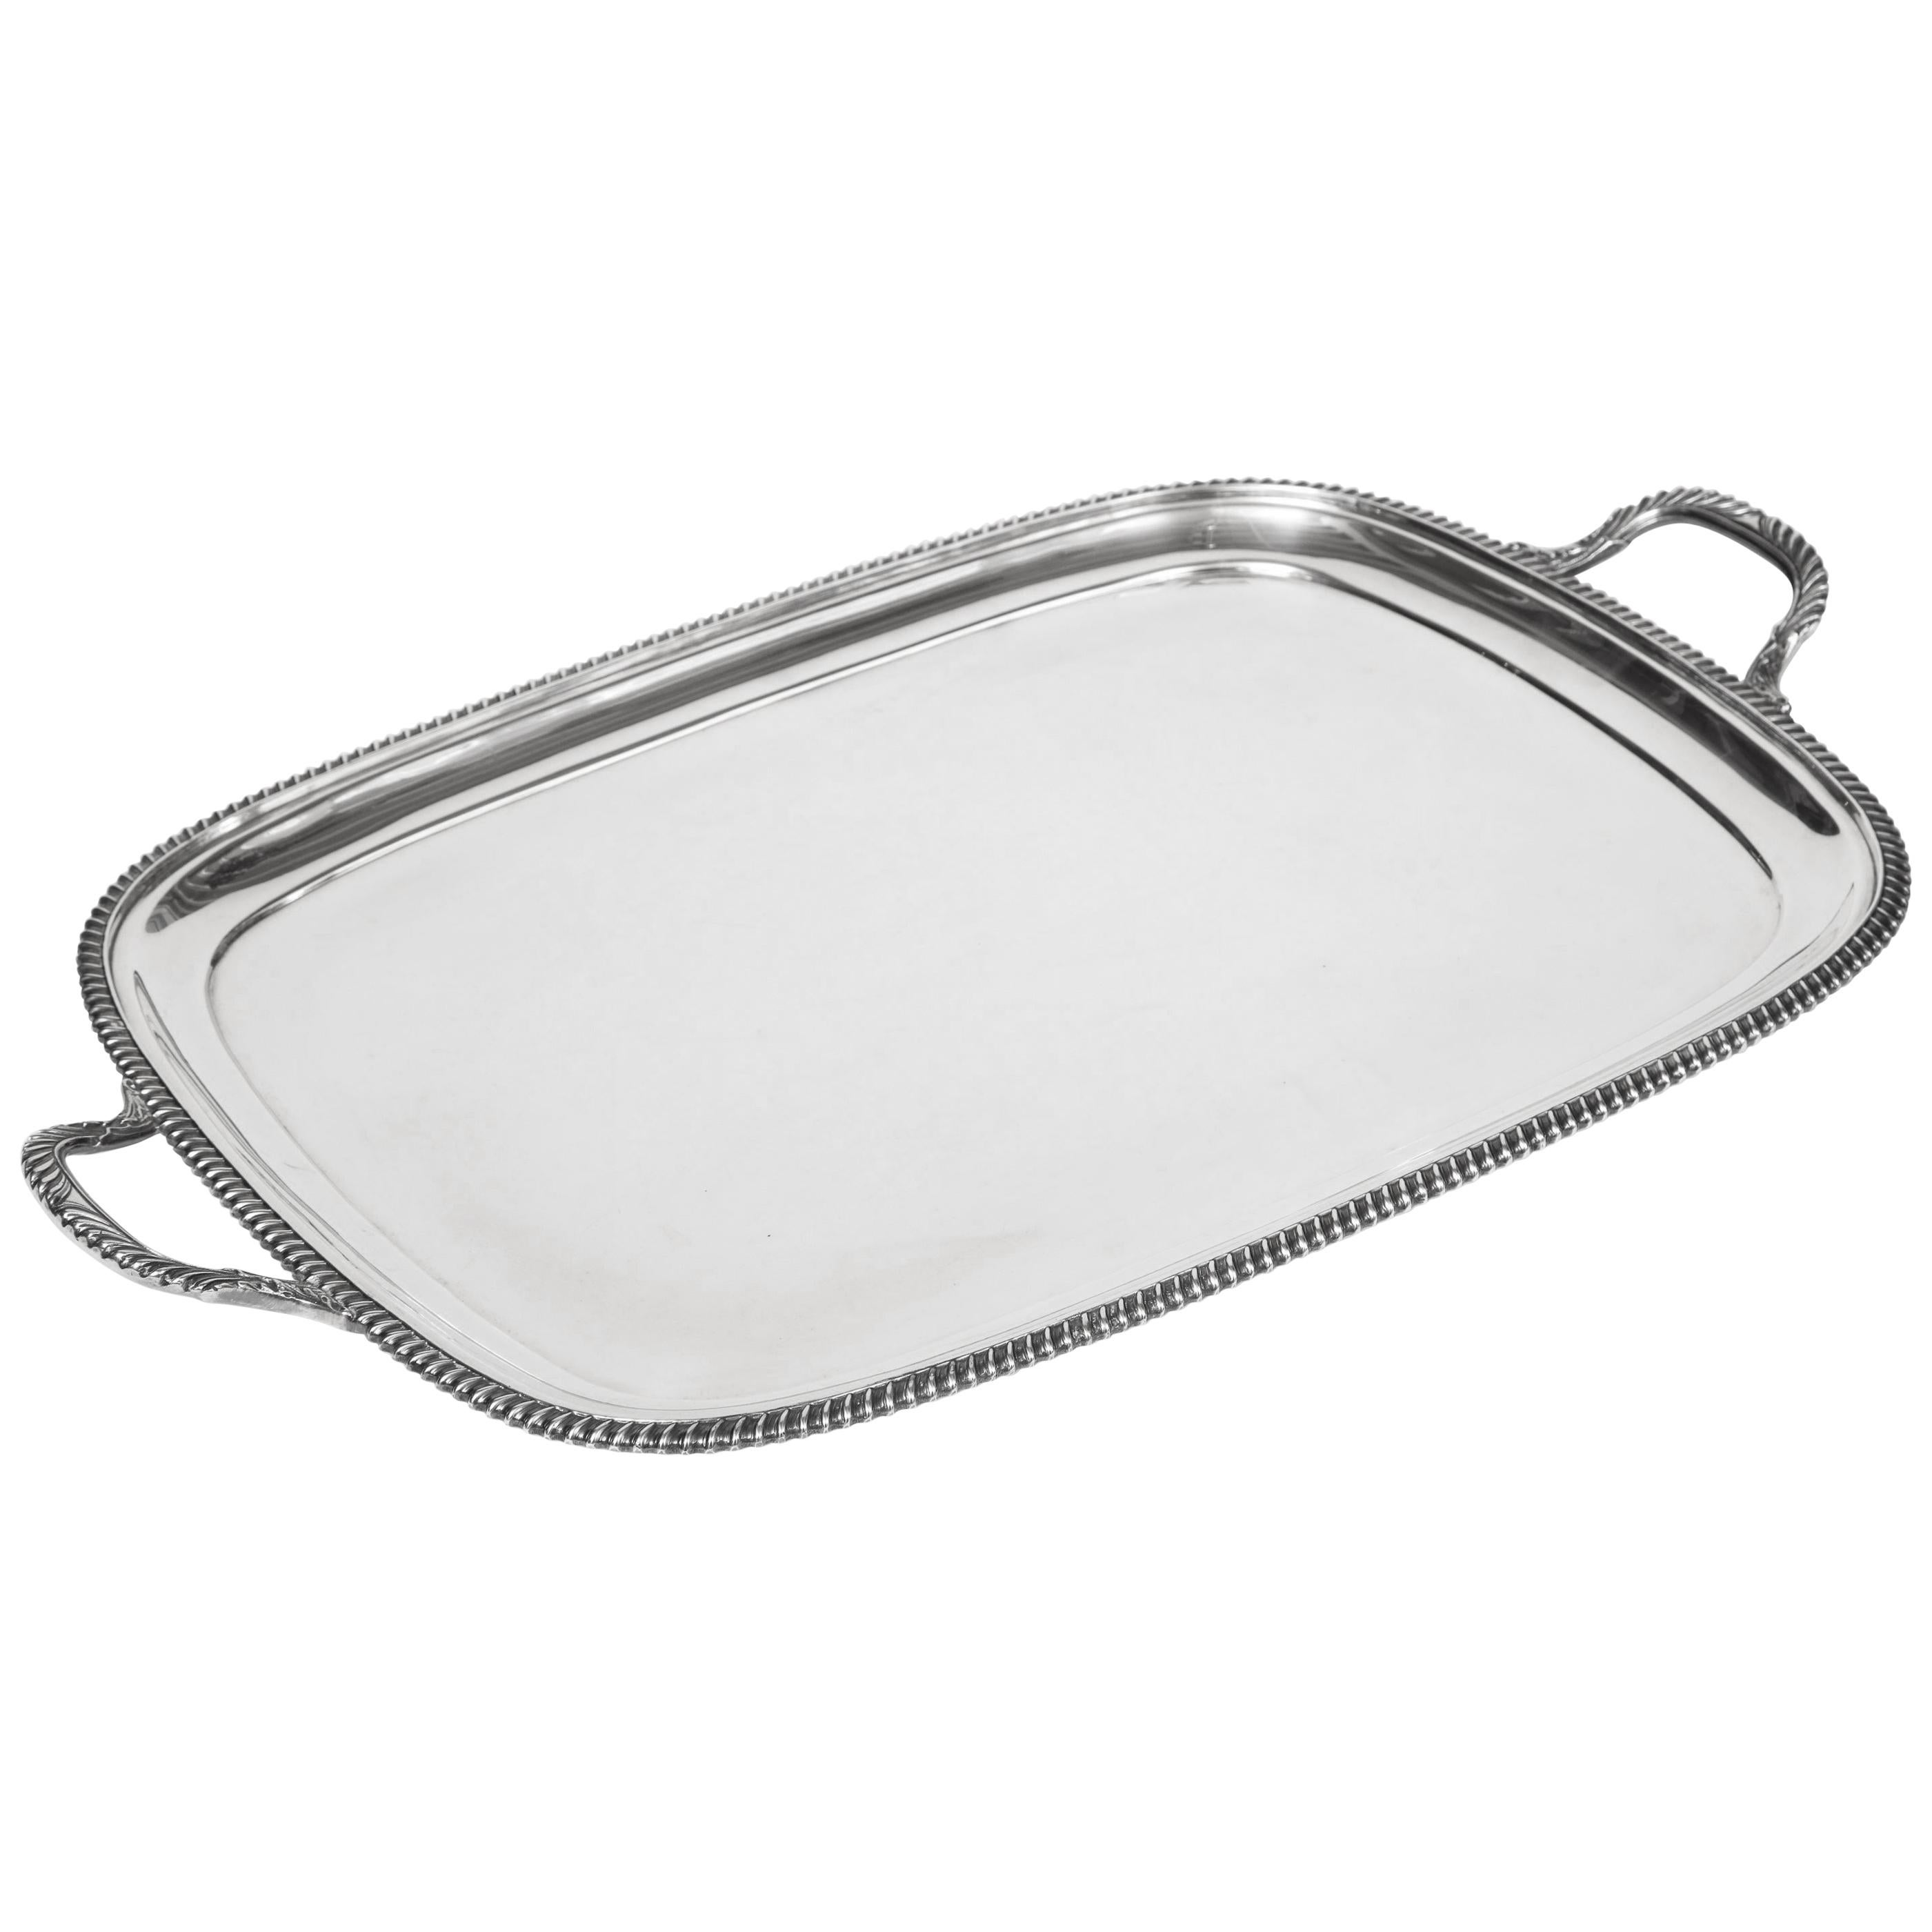 English, Silver Plated Tray